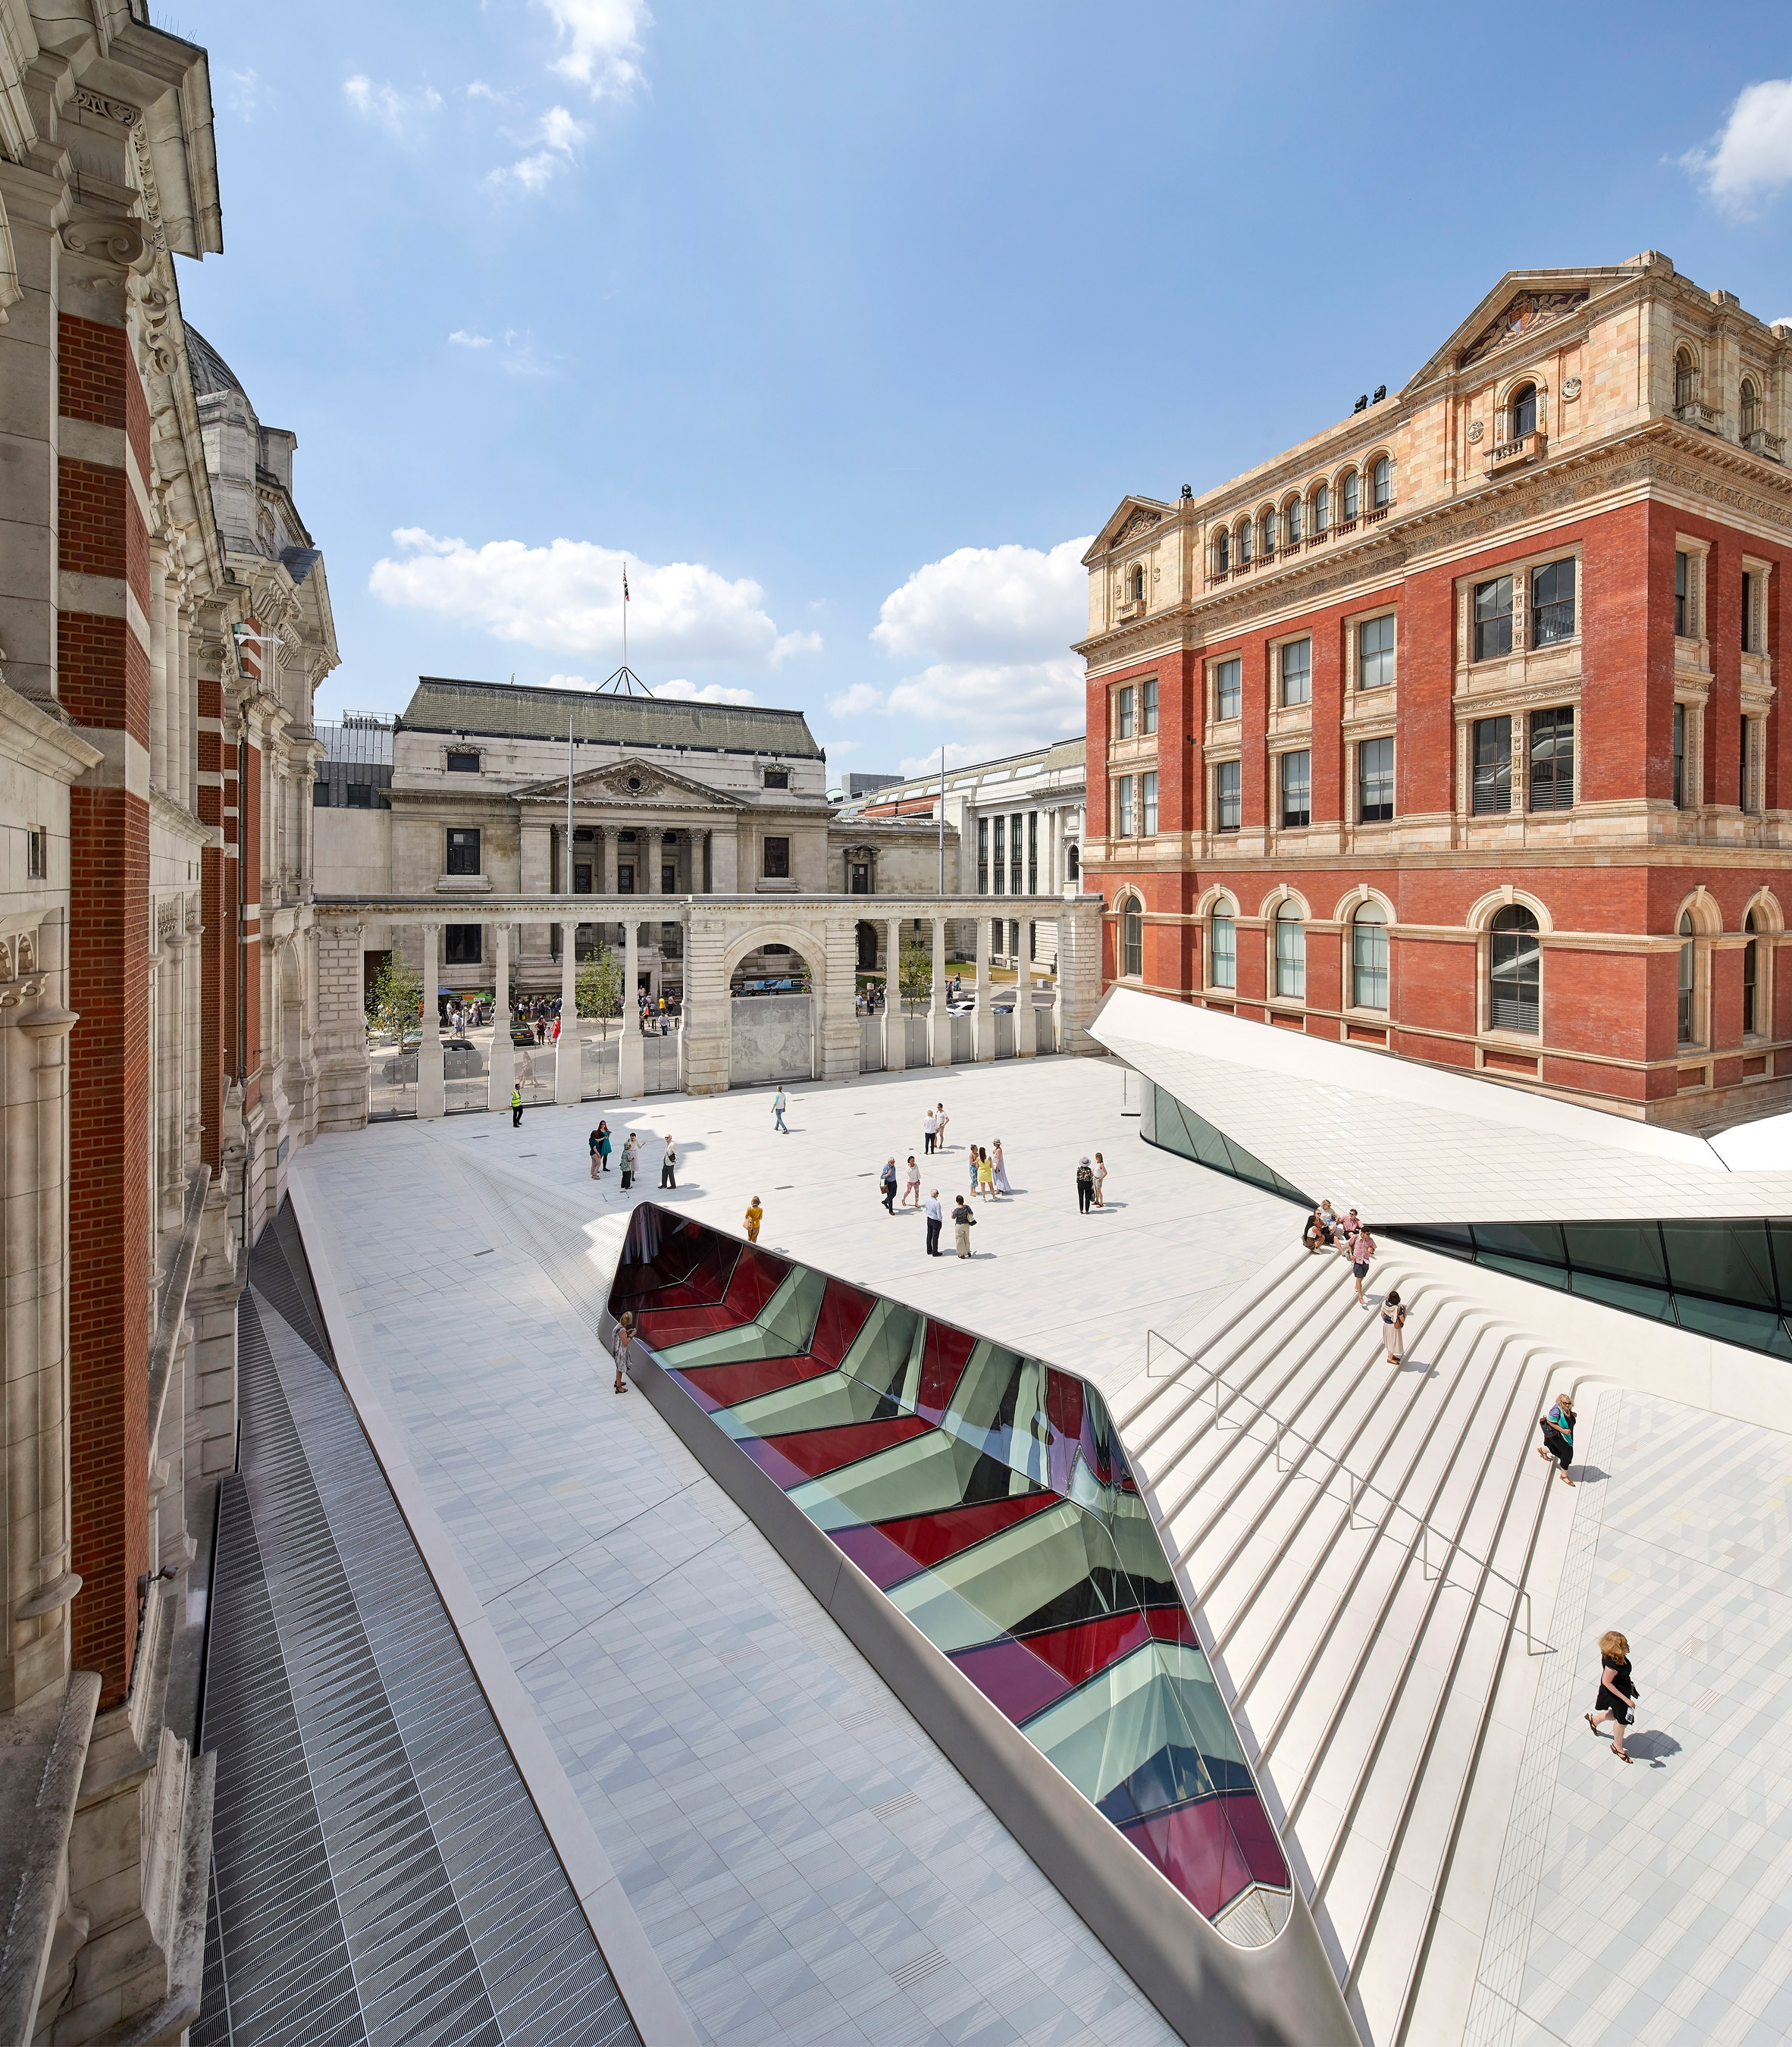 v&a museum, london - Foreman Roberts